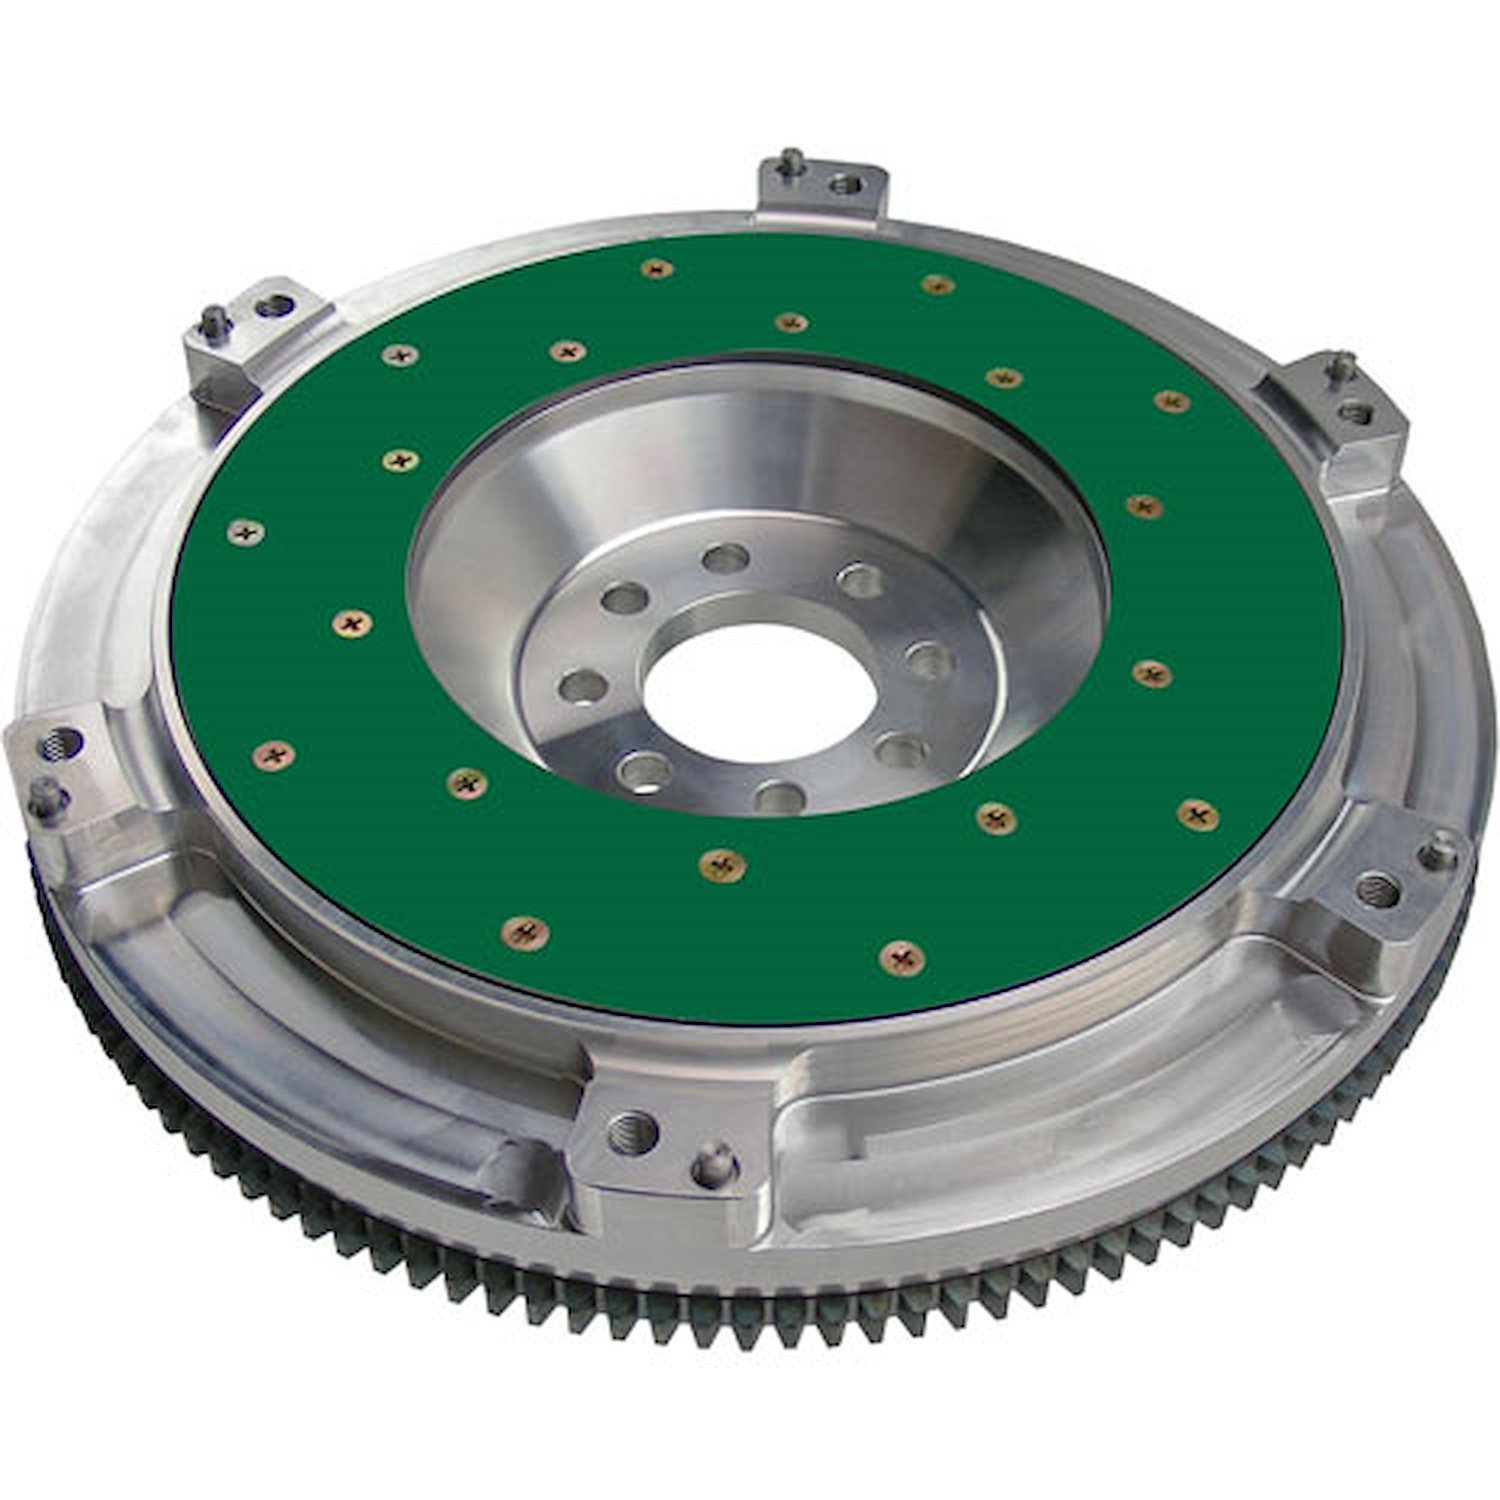 Flywheel-Aluminum PC Chr7 High Performance Lightweight with Replaceable Friction Plate